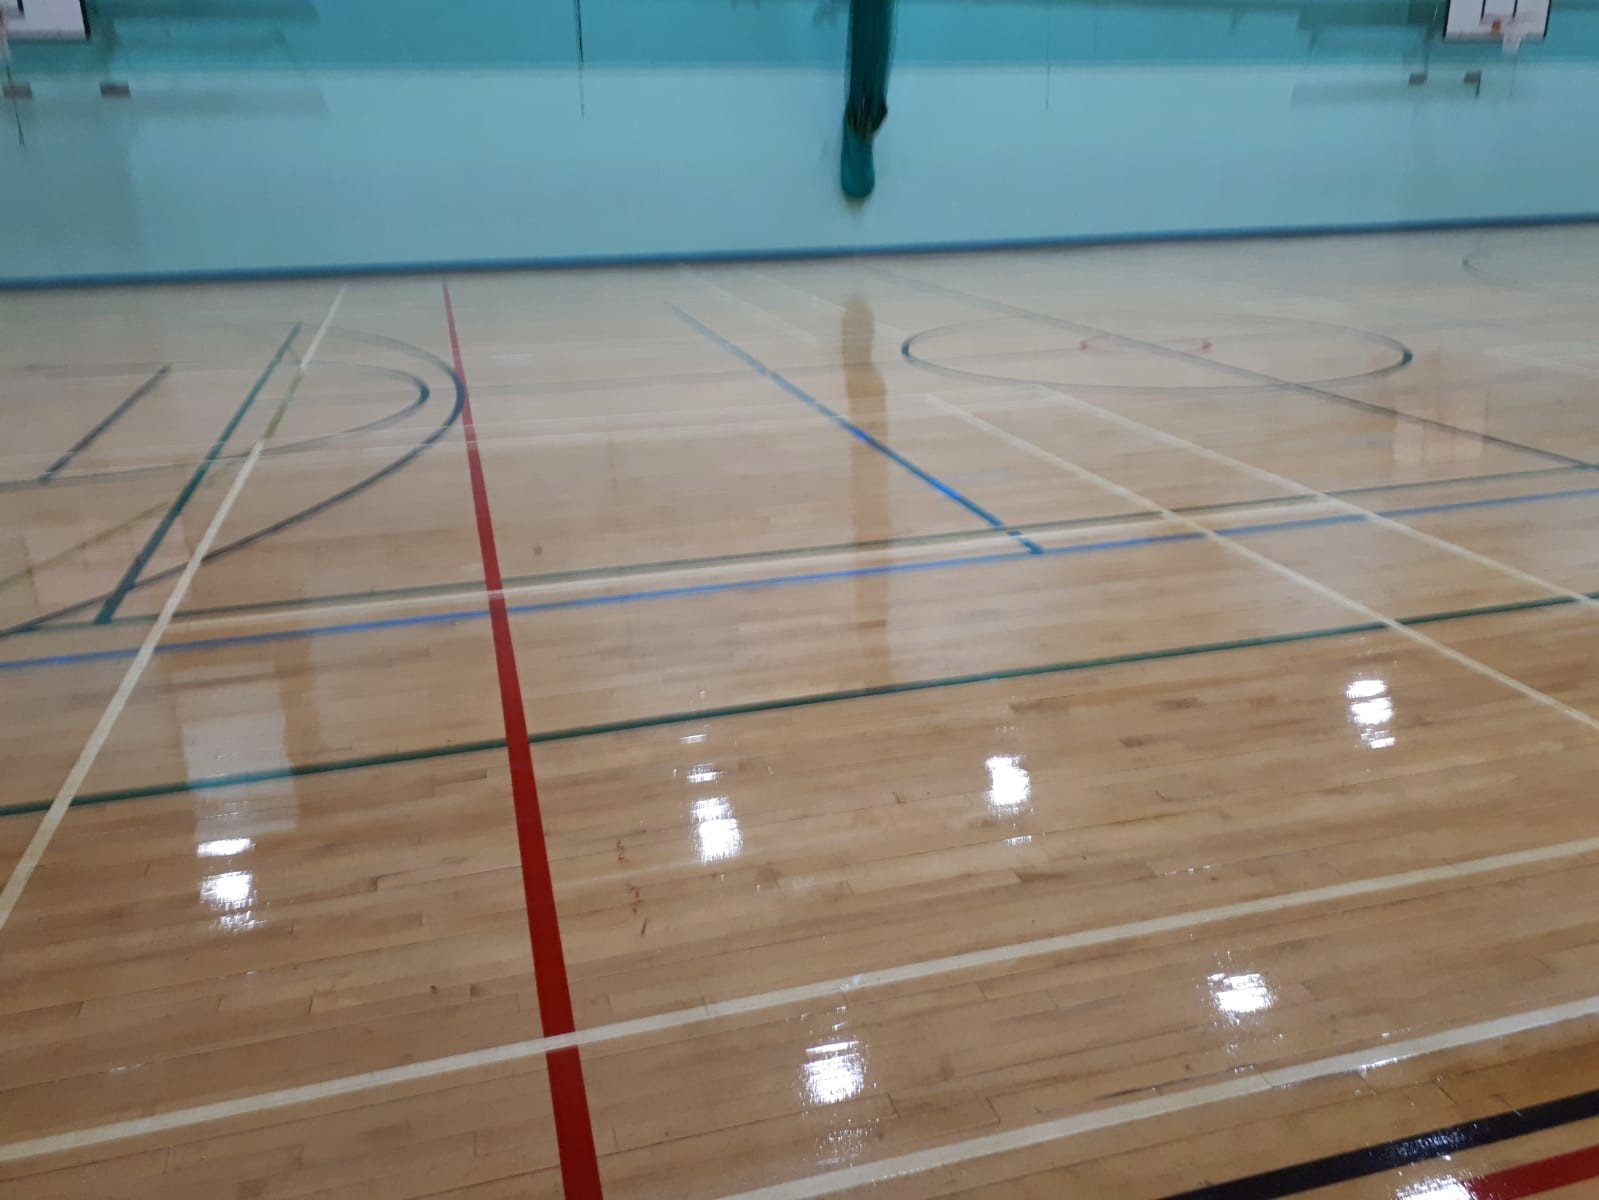 Castell Alun High School in Wrexham. The team replaced defective sections of the timber floor, scrubbed and applied a clear polyurethane seal and finally re-marked the netball courts.